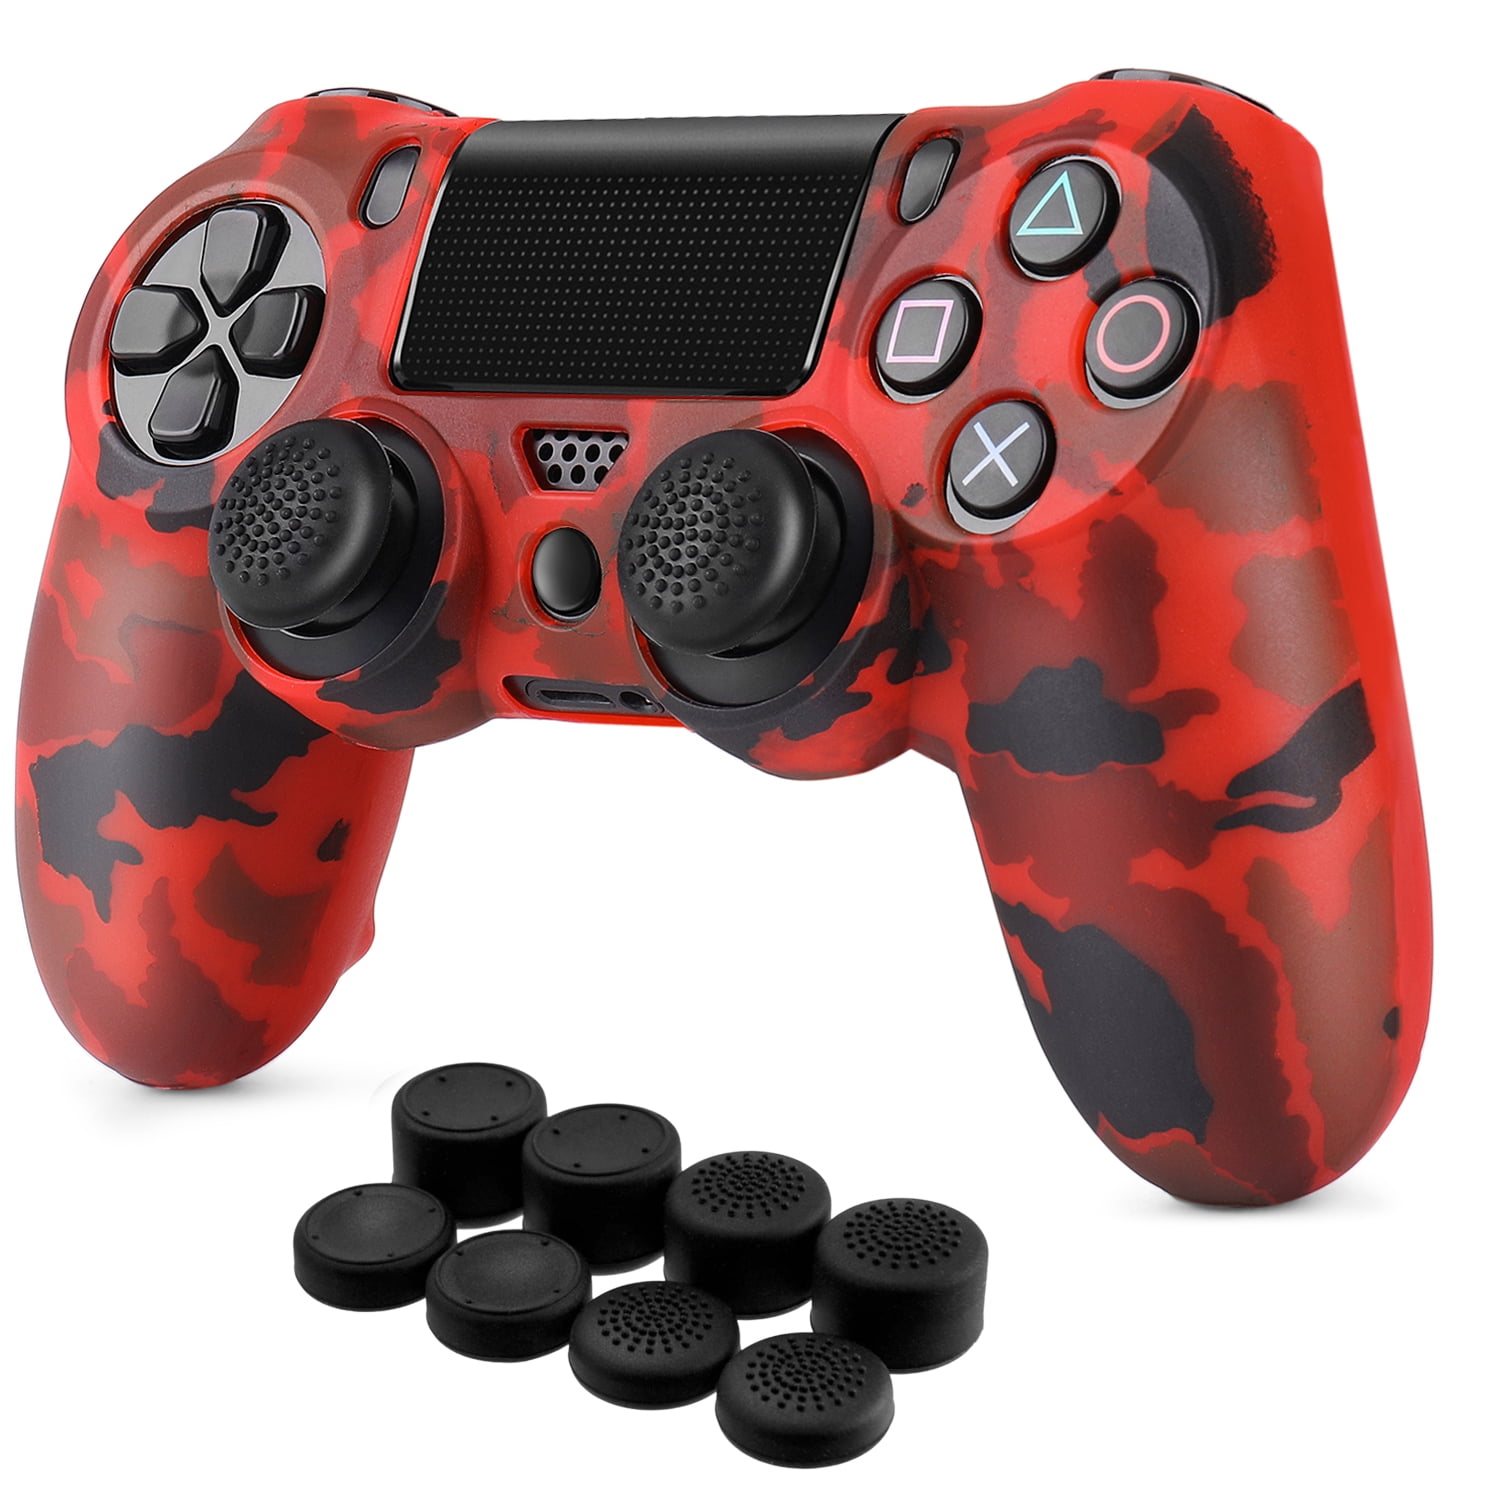 Wreck Mauve Mor PS4 / Slim / Pro Controller Skin Grip Cover Case Set - Protective Soft  Silicone Gel Rubber Shell & Anti-slip Thumb Stick Caps for Sony PlayStation  4 Controller Gaming Gamepad (Camo Red) - Walmart.com